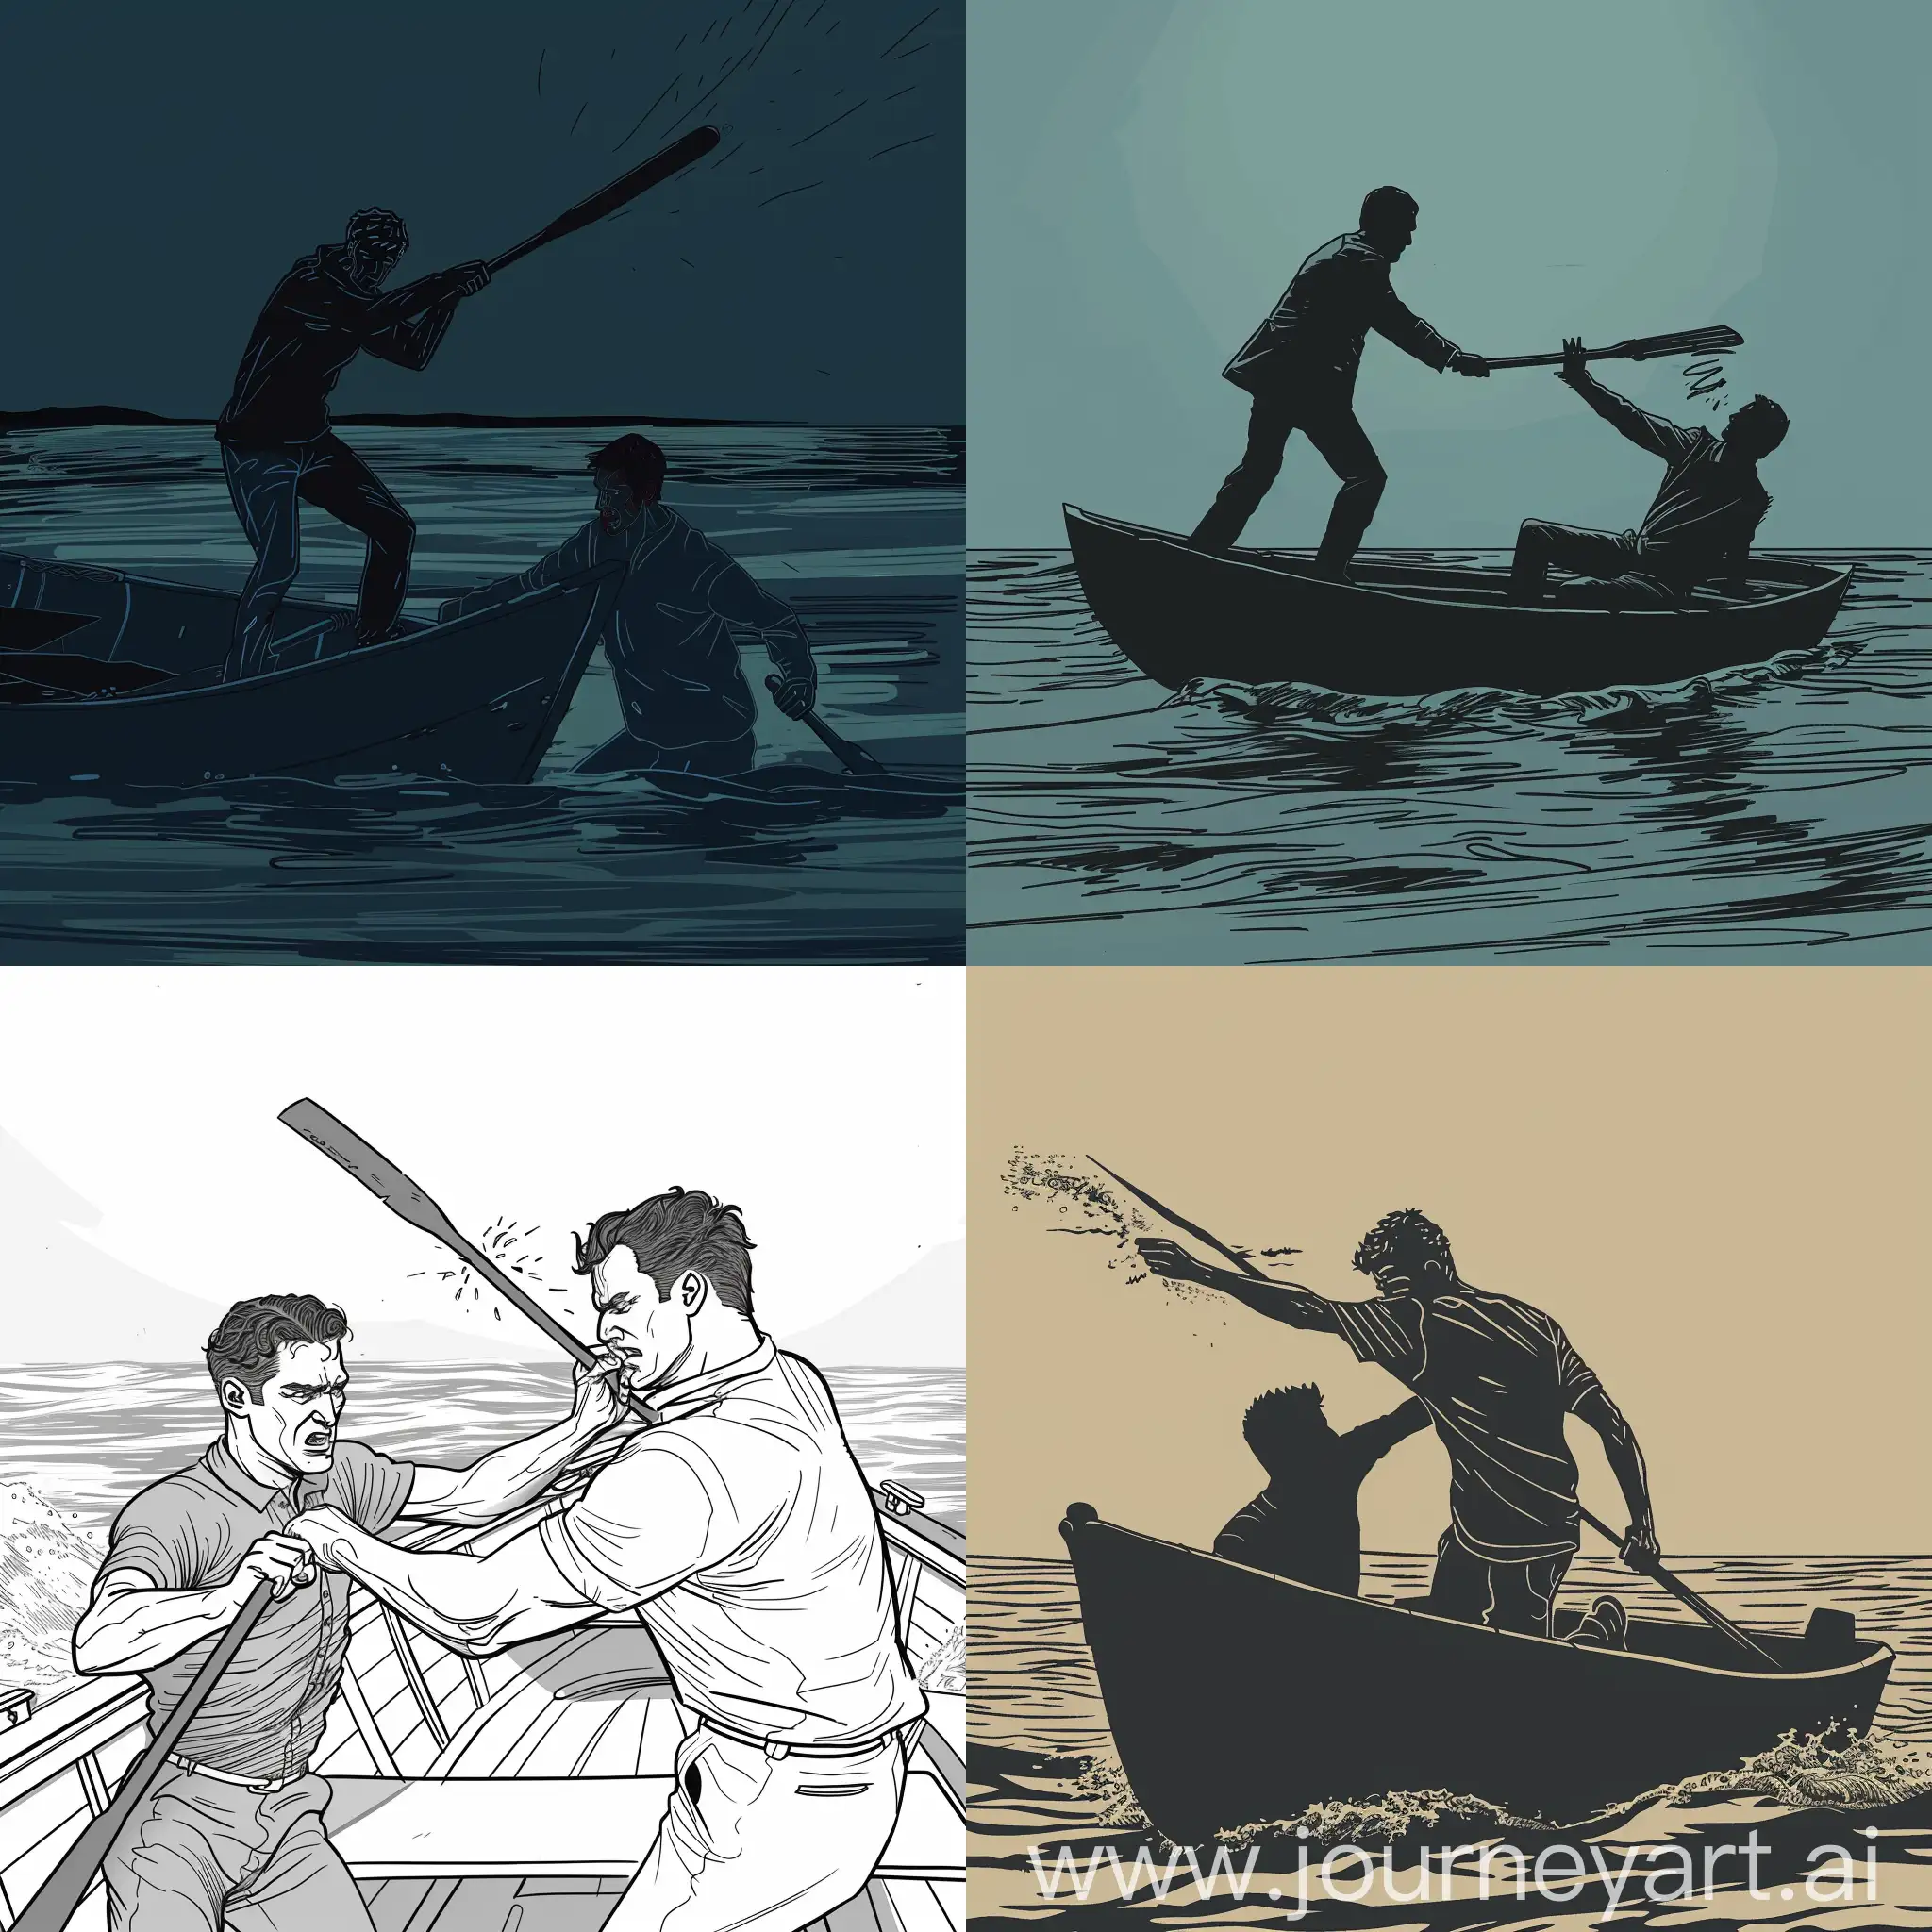 Create an image where a man is hitting another man on face with a boat paddle. Both men are in a boat in the middle of the ocean. The style I want you to create this image should only be outline of the boat and the persons onboard. This image is actually inspired by the scene when Tom Ripley kills Greenfield on the boat.